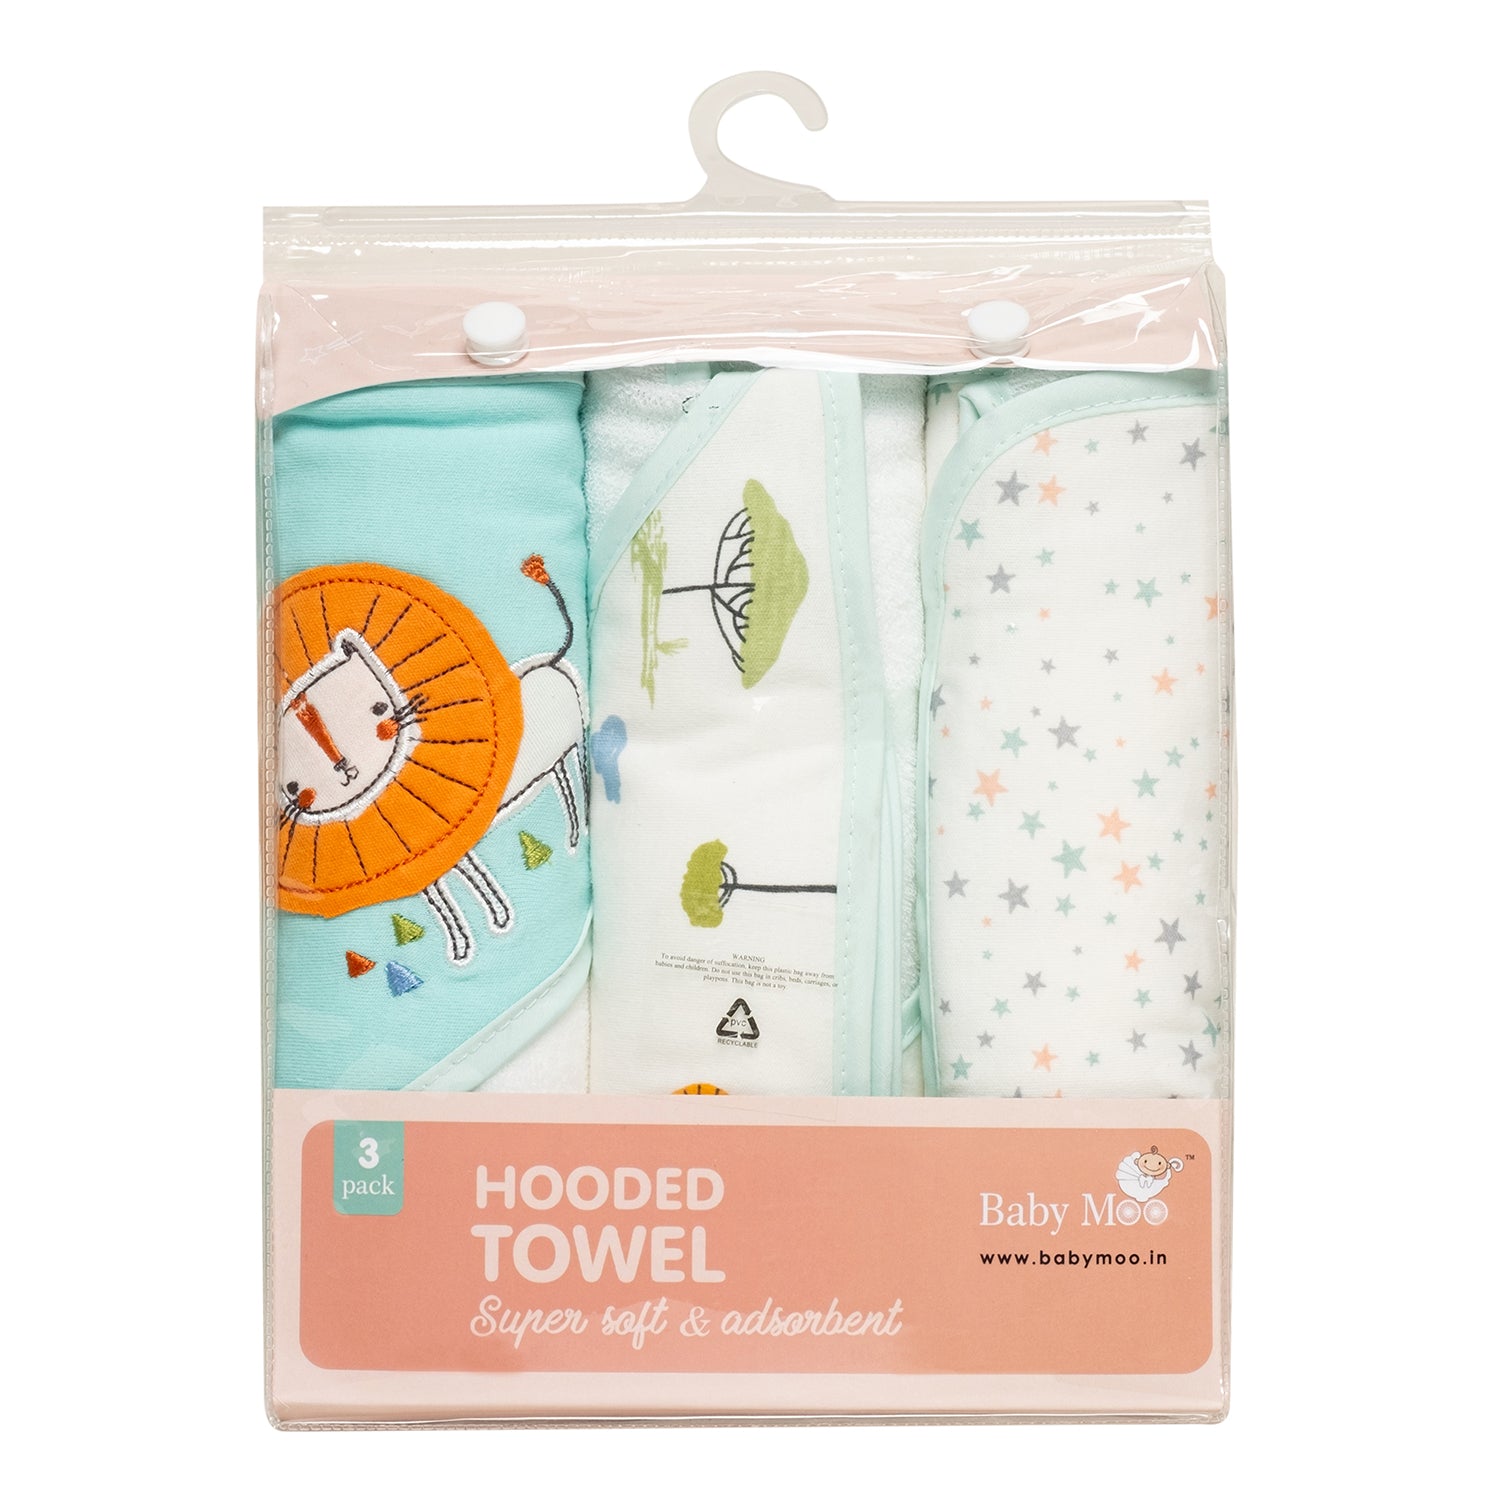 Baby Moo Lion And Star Supersoft Highly Absorbent Durable Hooded Towel Set - Turquoise